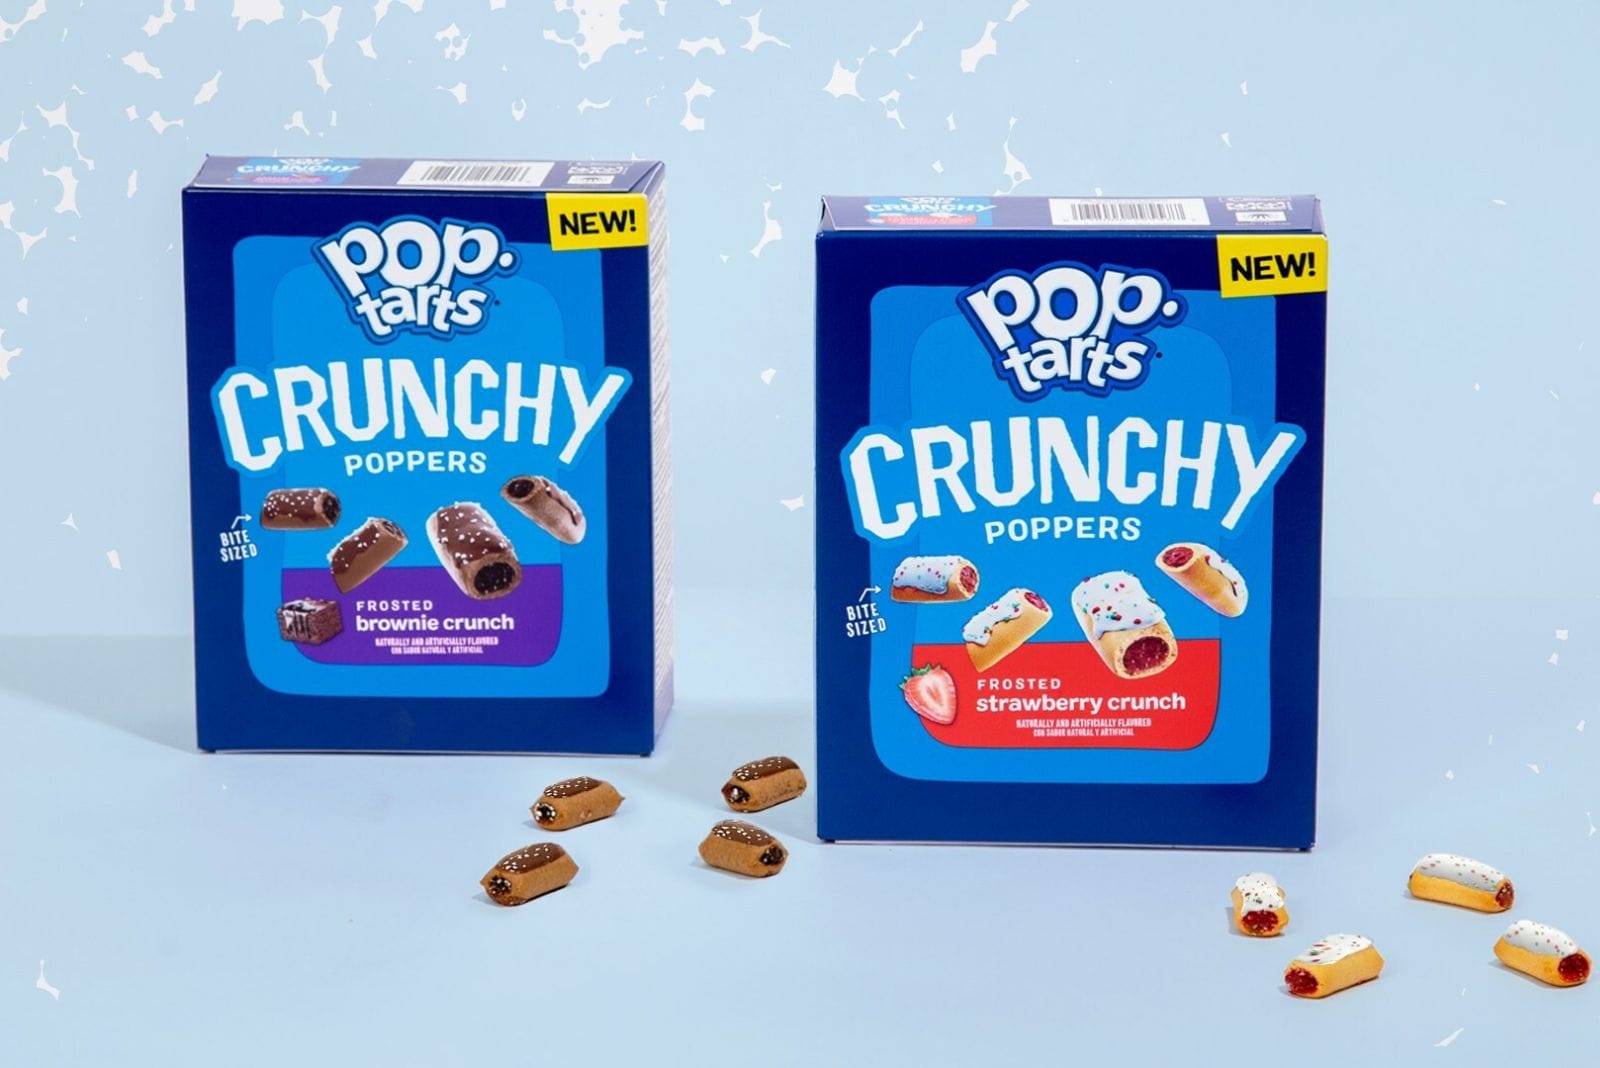 Two boxes of PopTarts Crunchy Poppers on blue backdrop